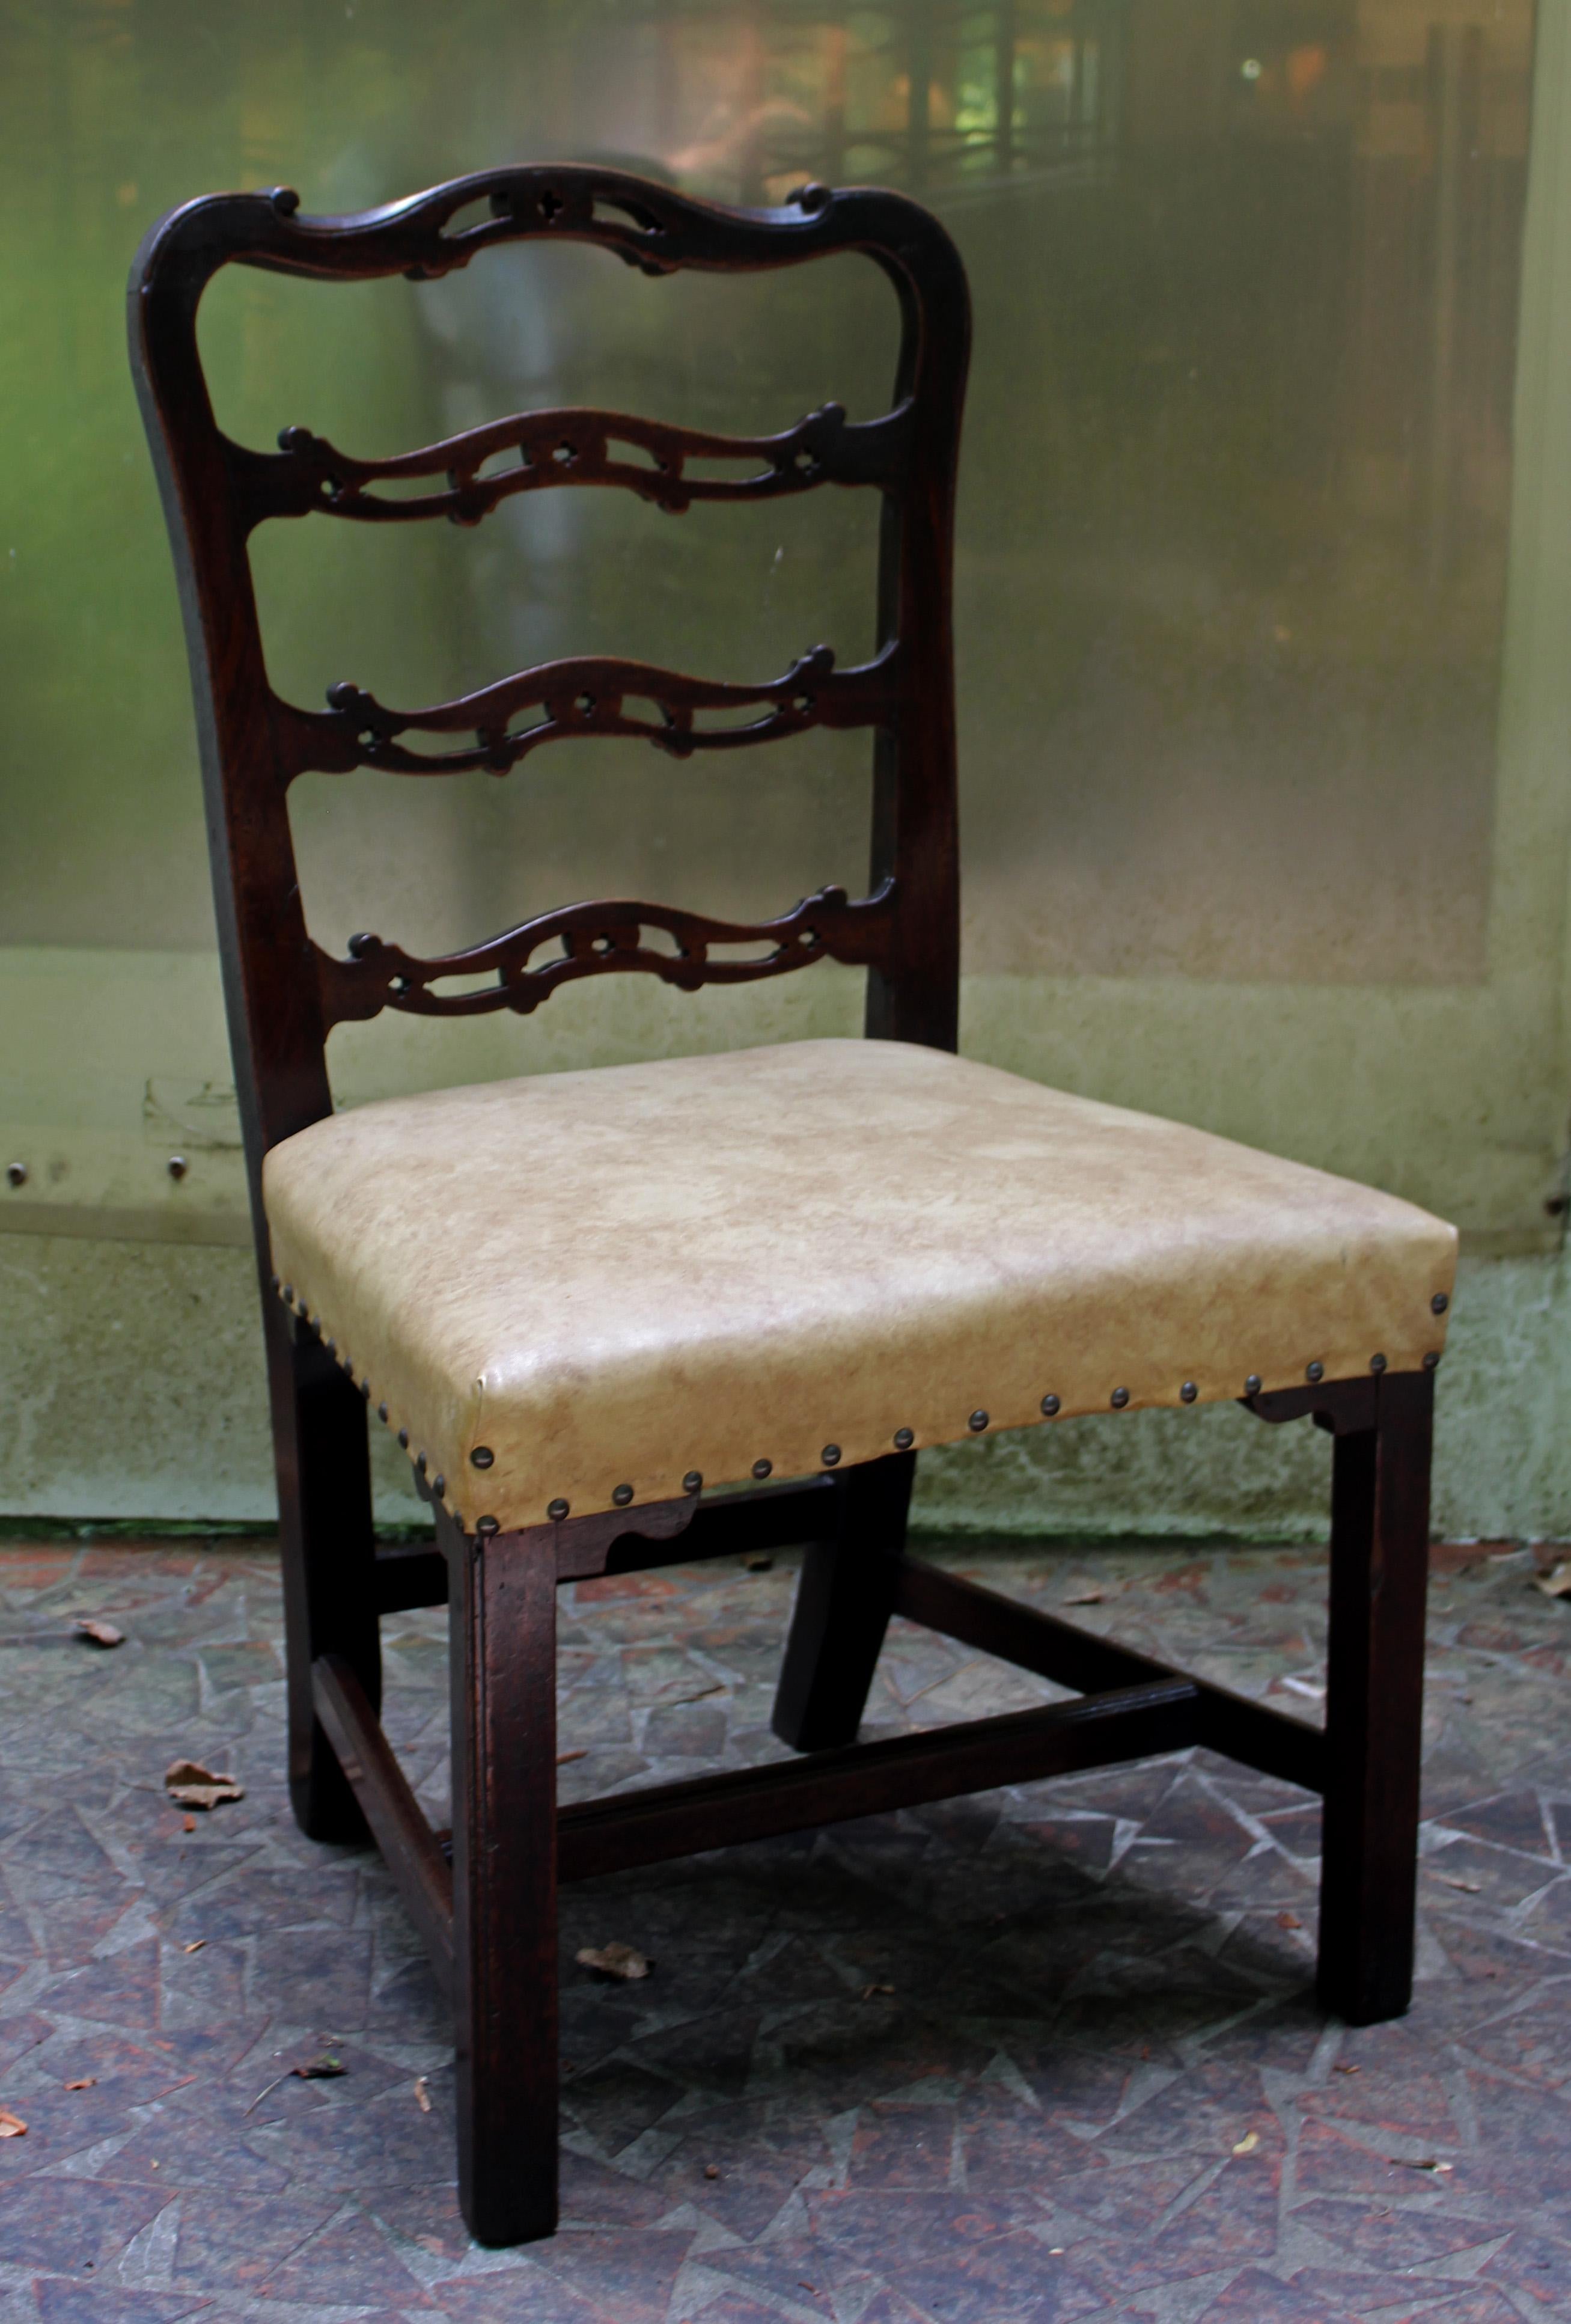 A George III side chair of good, sturdy size. English, c.1760, mahogany. The wavy ladder back with Gothic open cut-work typical of Chippendale design. Stretchered, square molded legs with shaped decorative seat returns. Faux leather upholstery with